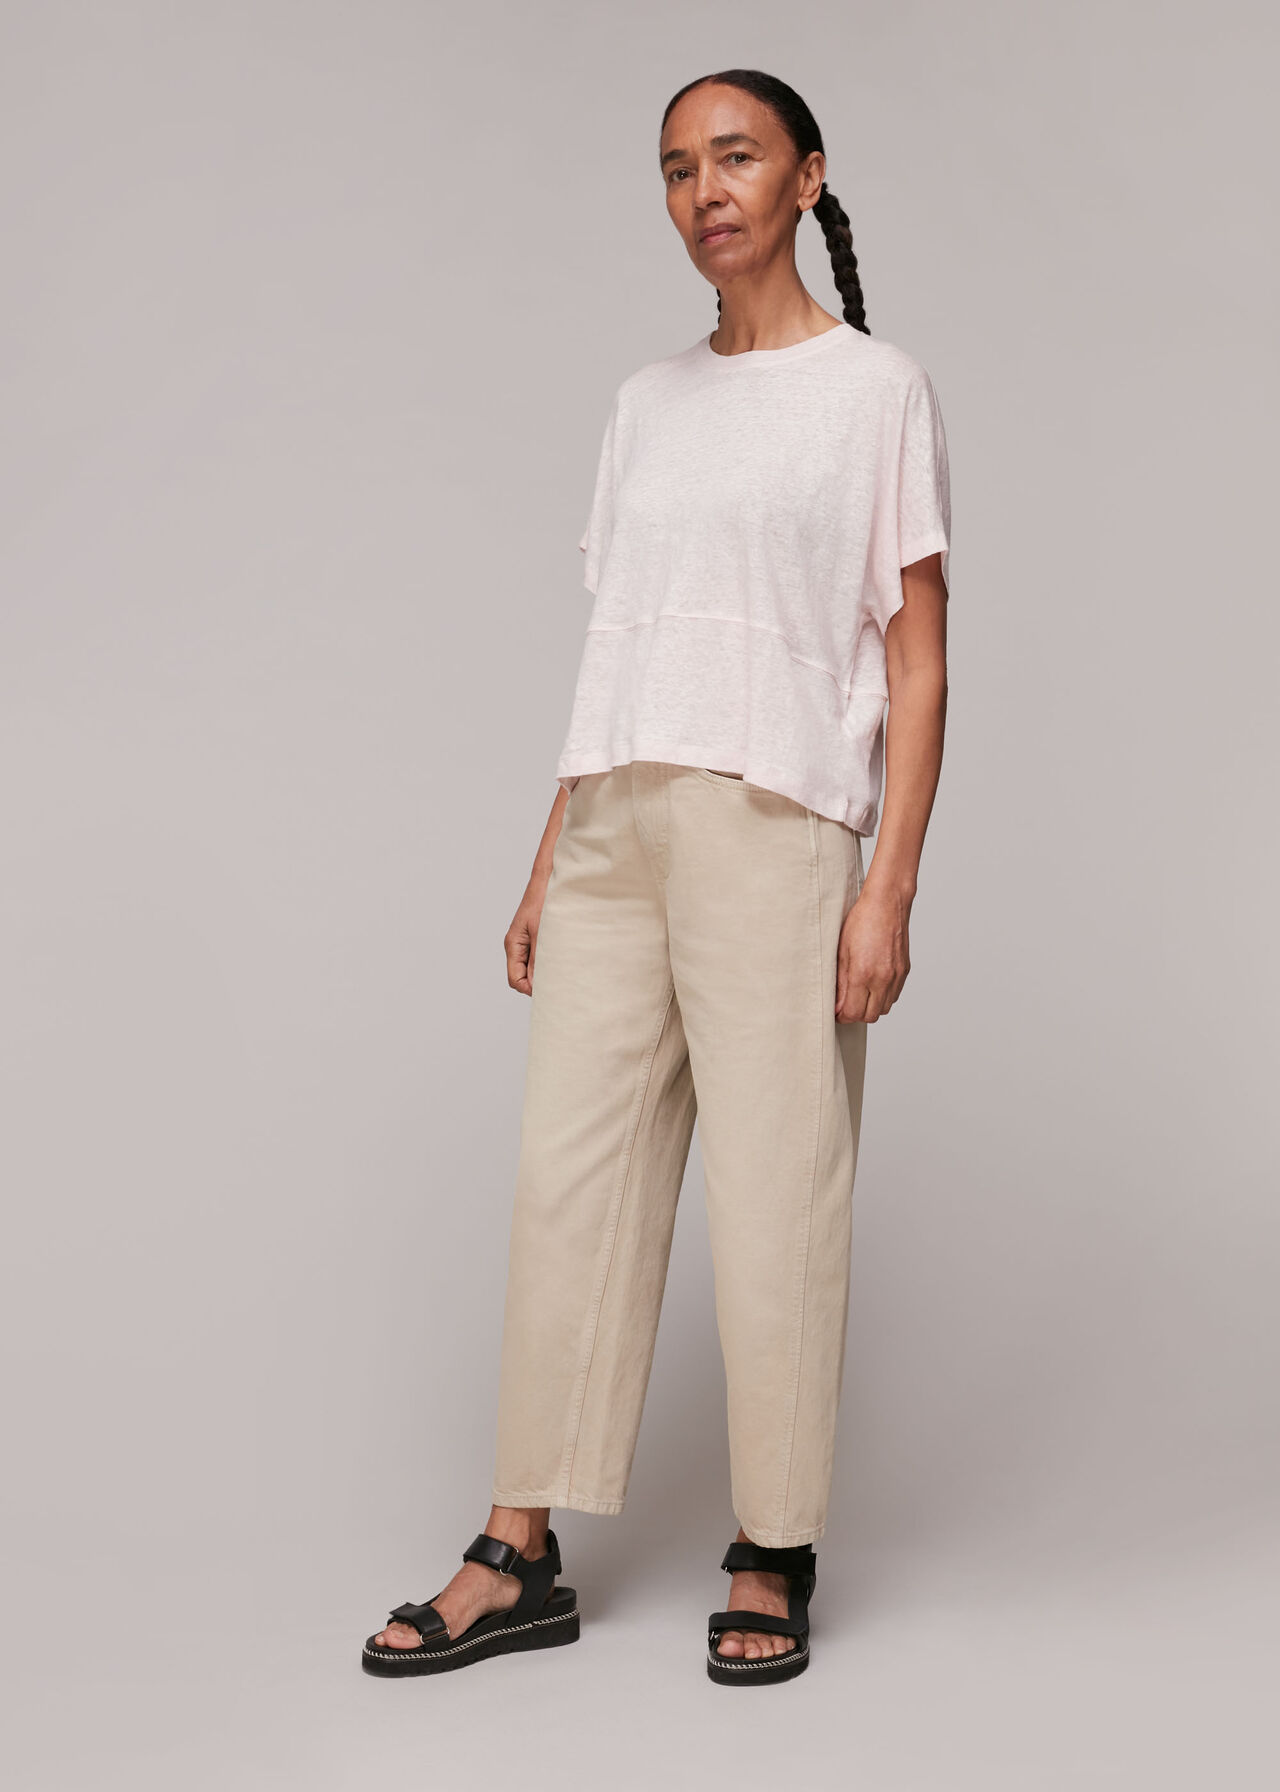 Pale Pink Button Back Linen Tee | WHISTLES